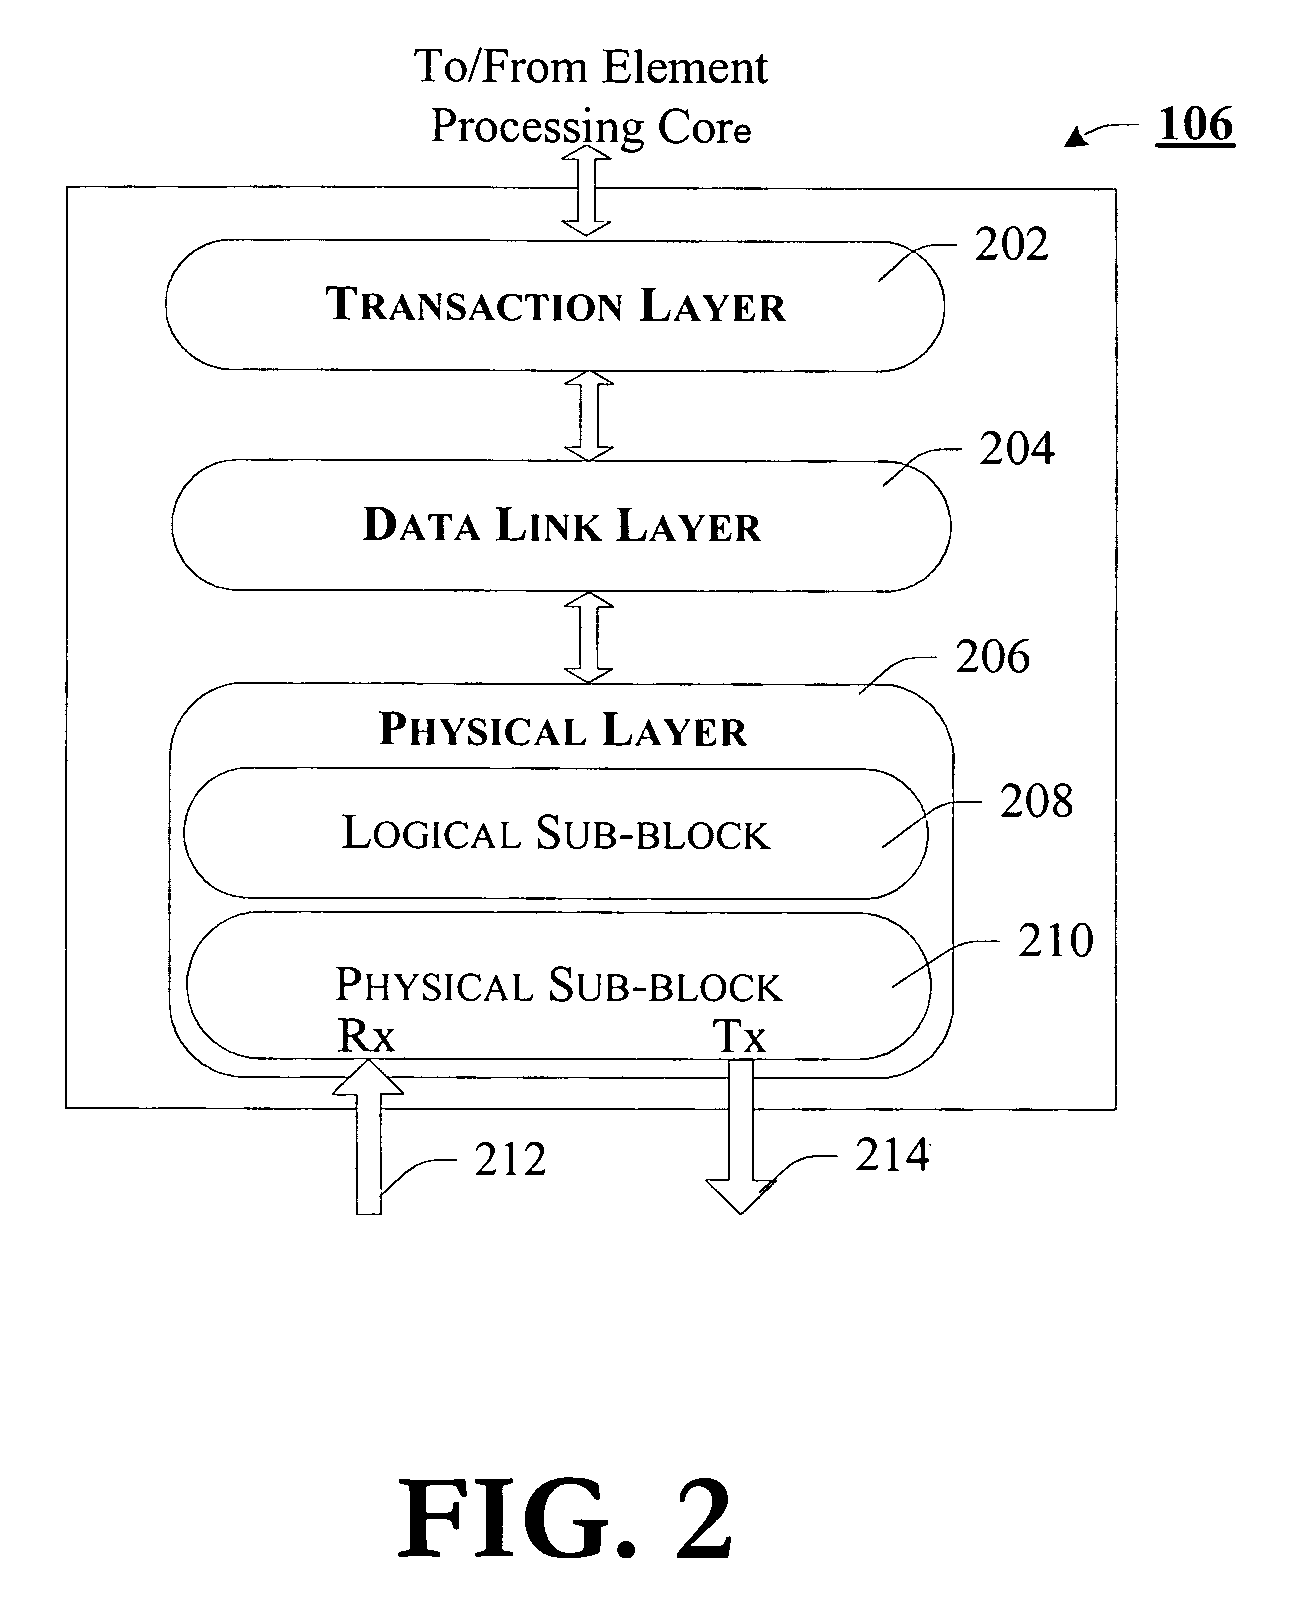 Communicating message request transaction types between agents in a computer system using multiple message groups